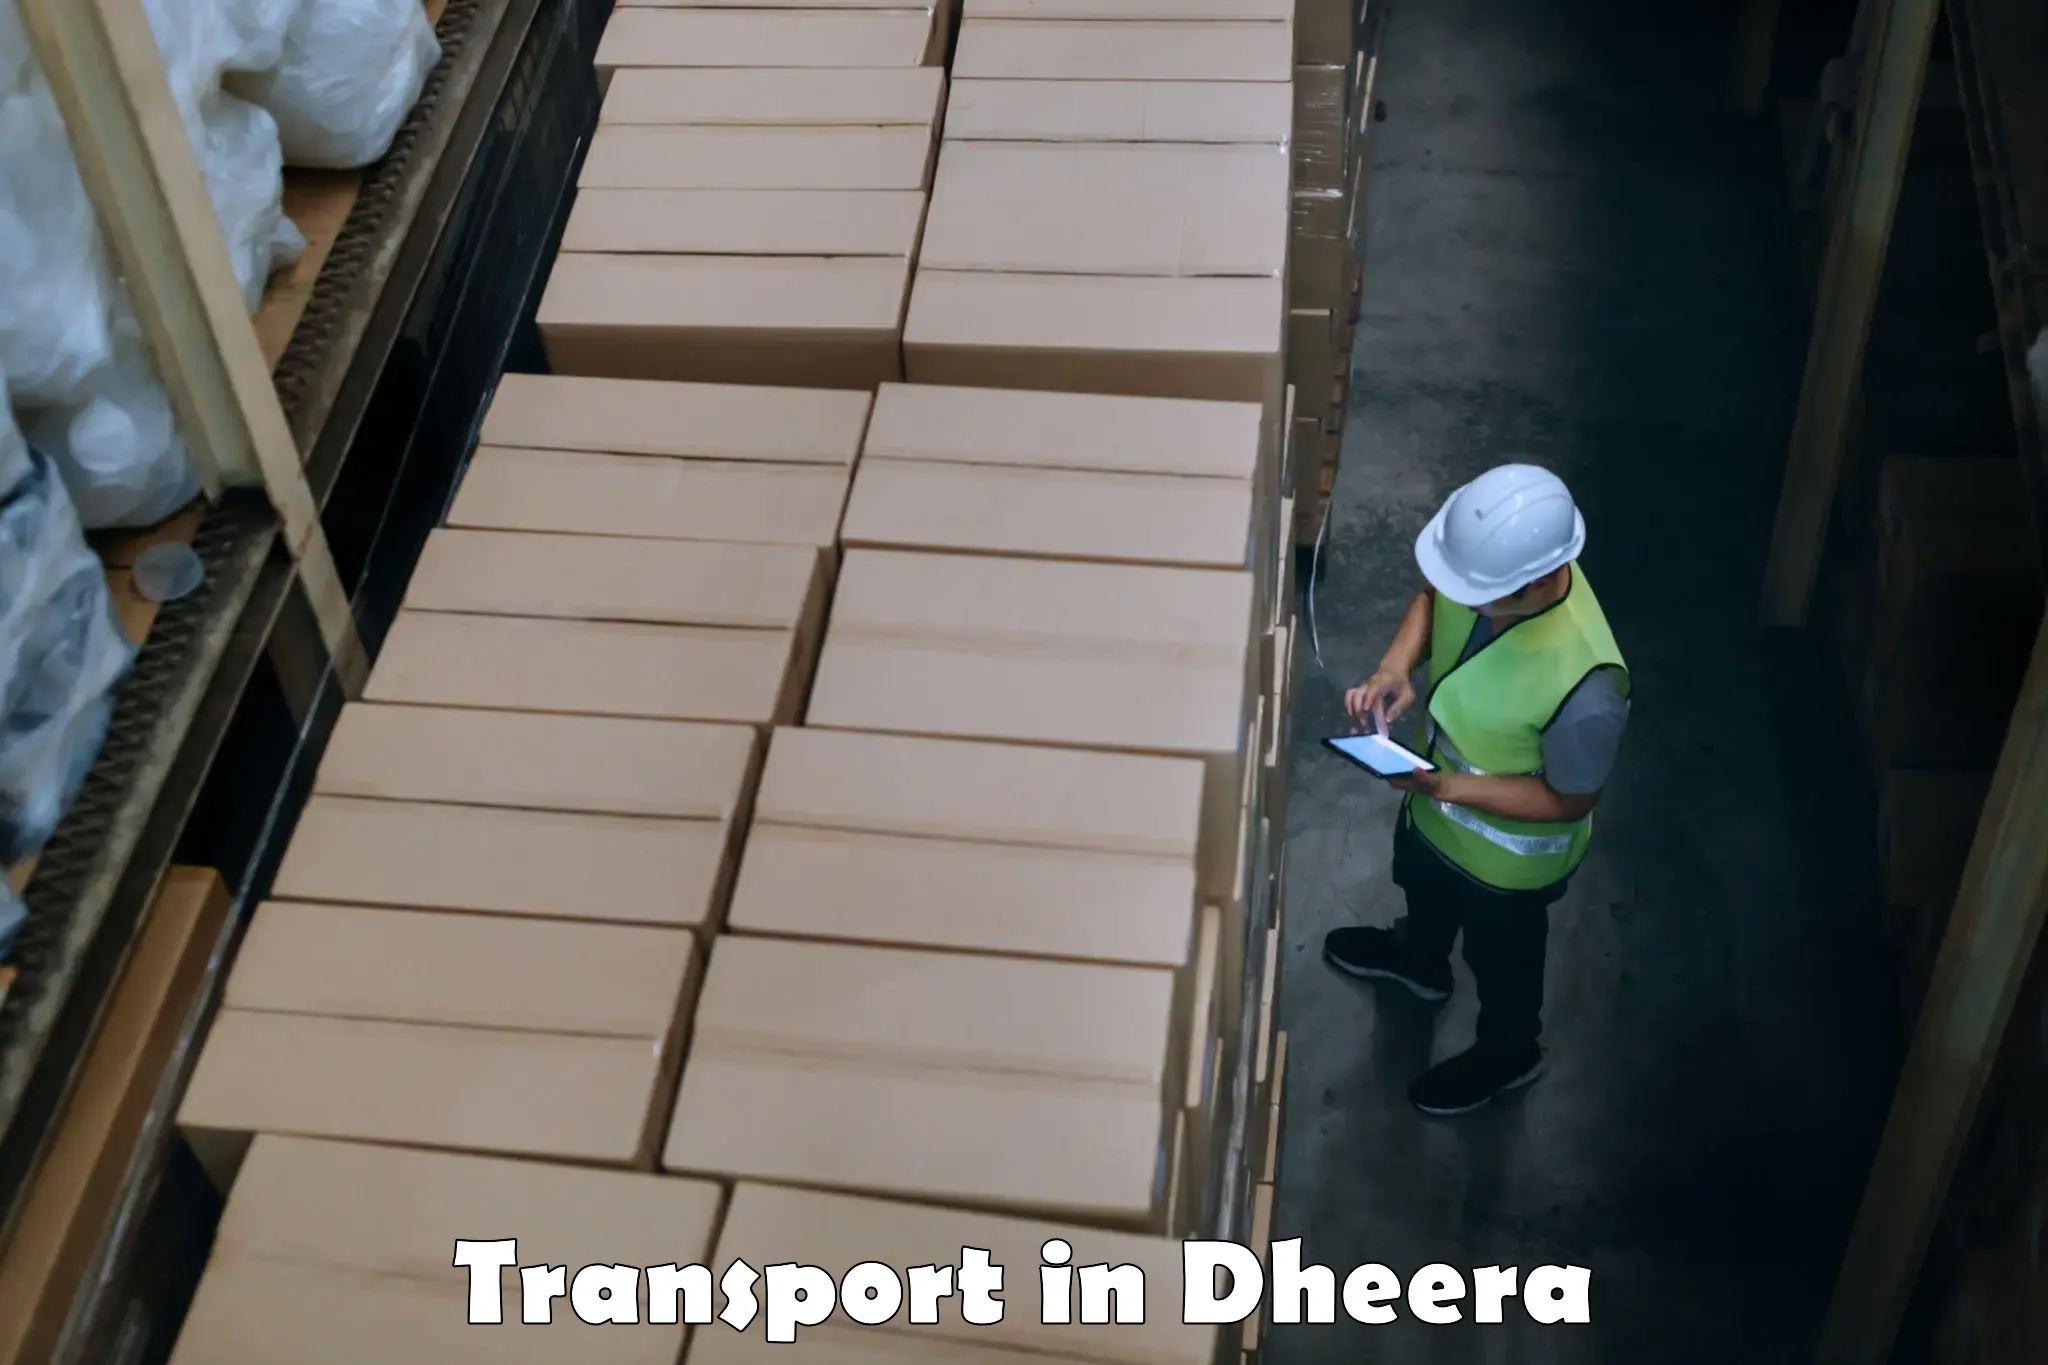 Parcel transport services in Dheera